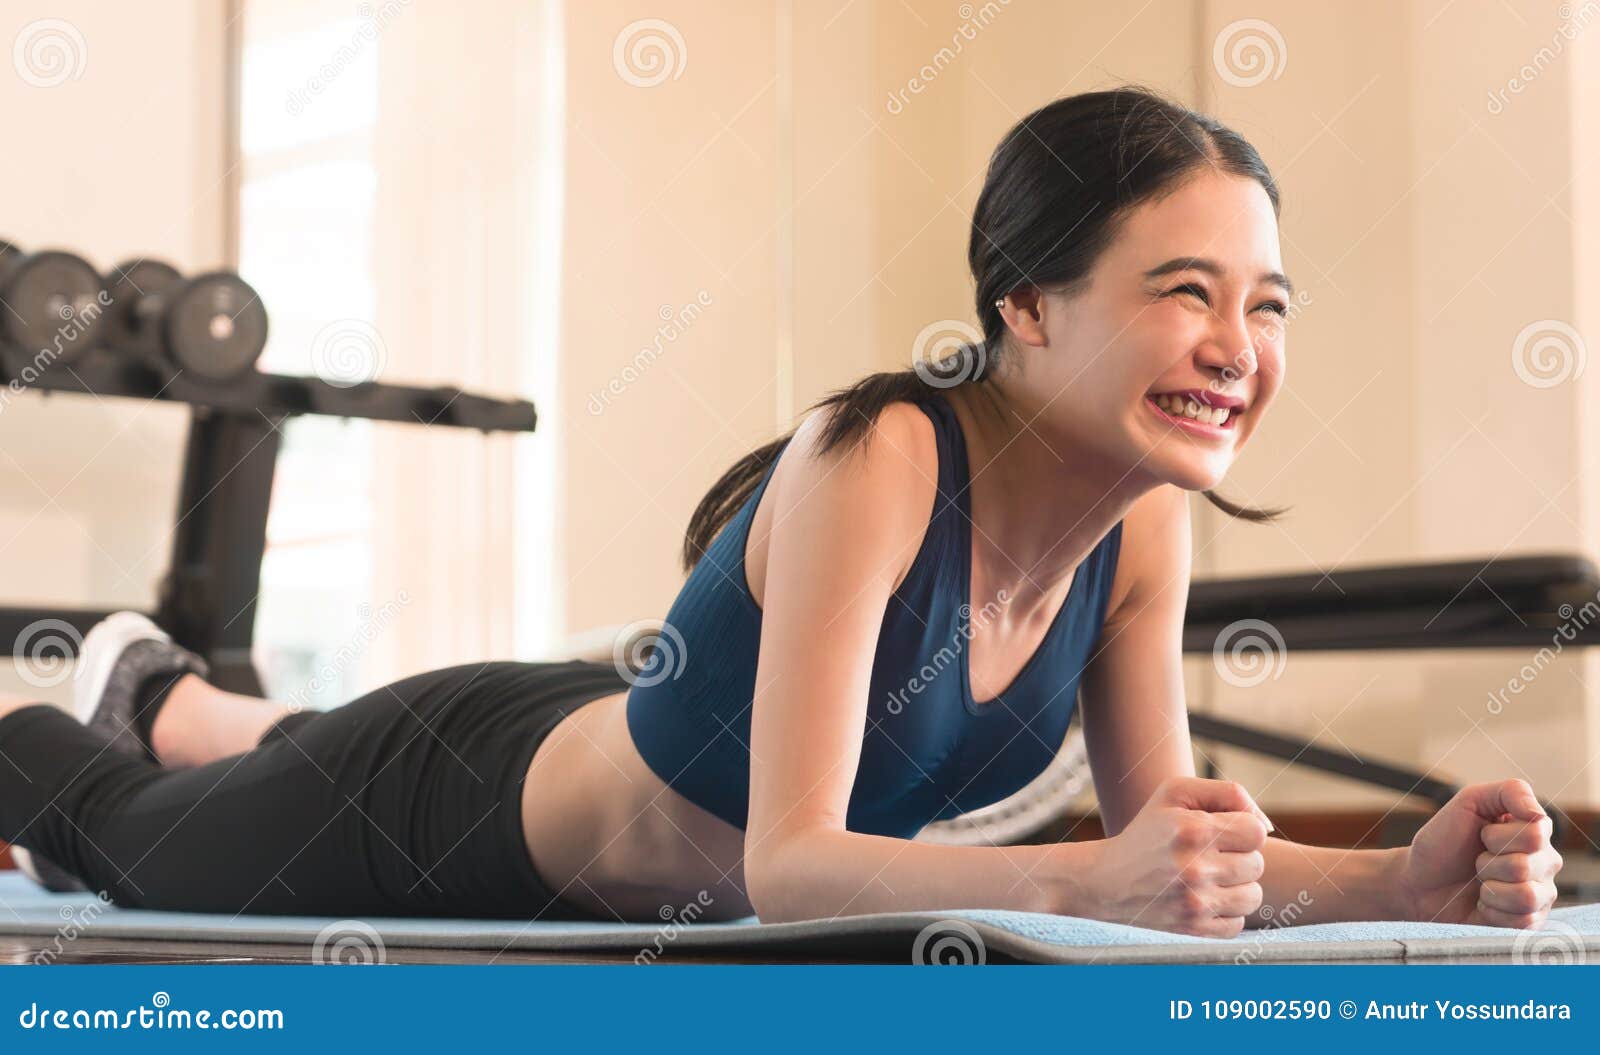 Asian Girl Laughing while Working Out in the Gym Stock Photo - Image of ...